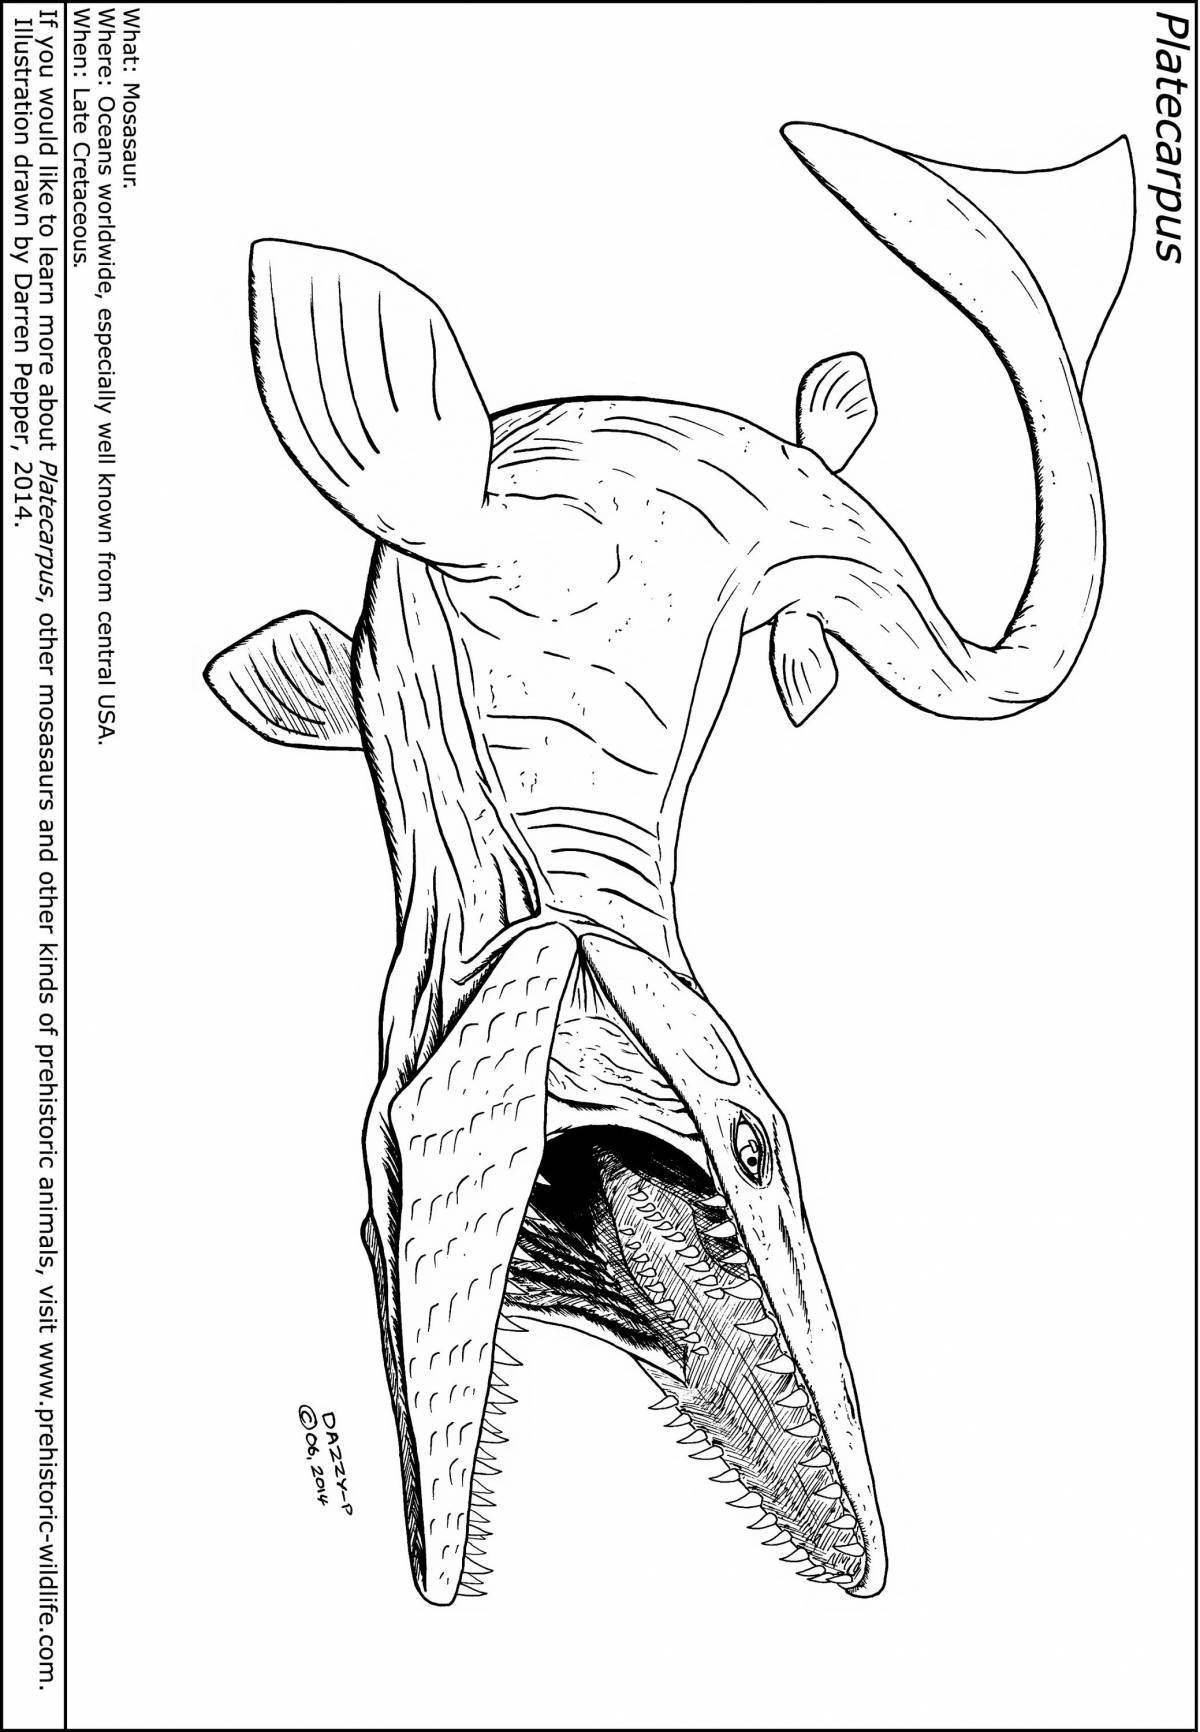 Outstanding mosasaurus coloring book for kids